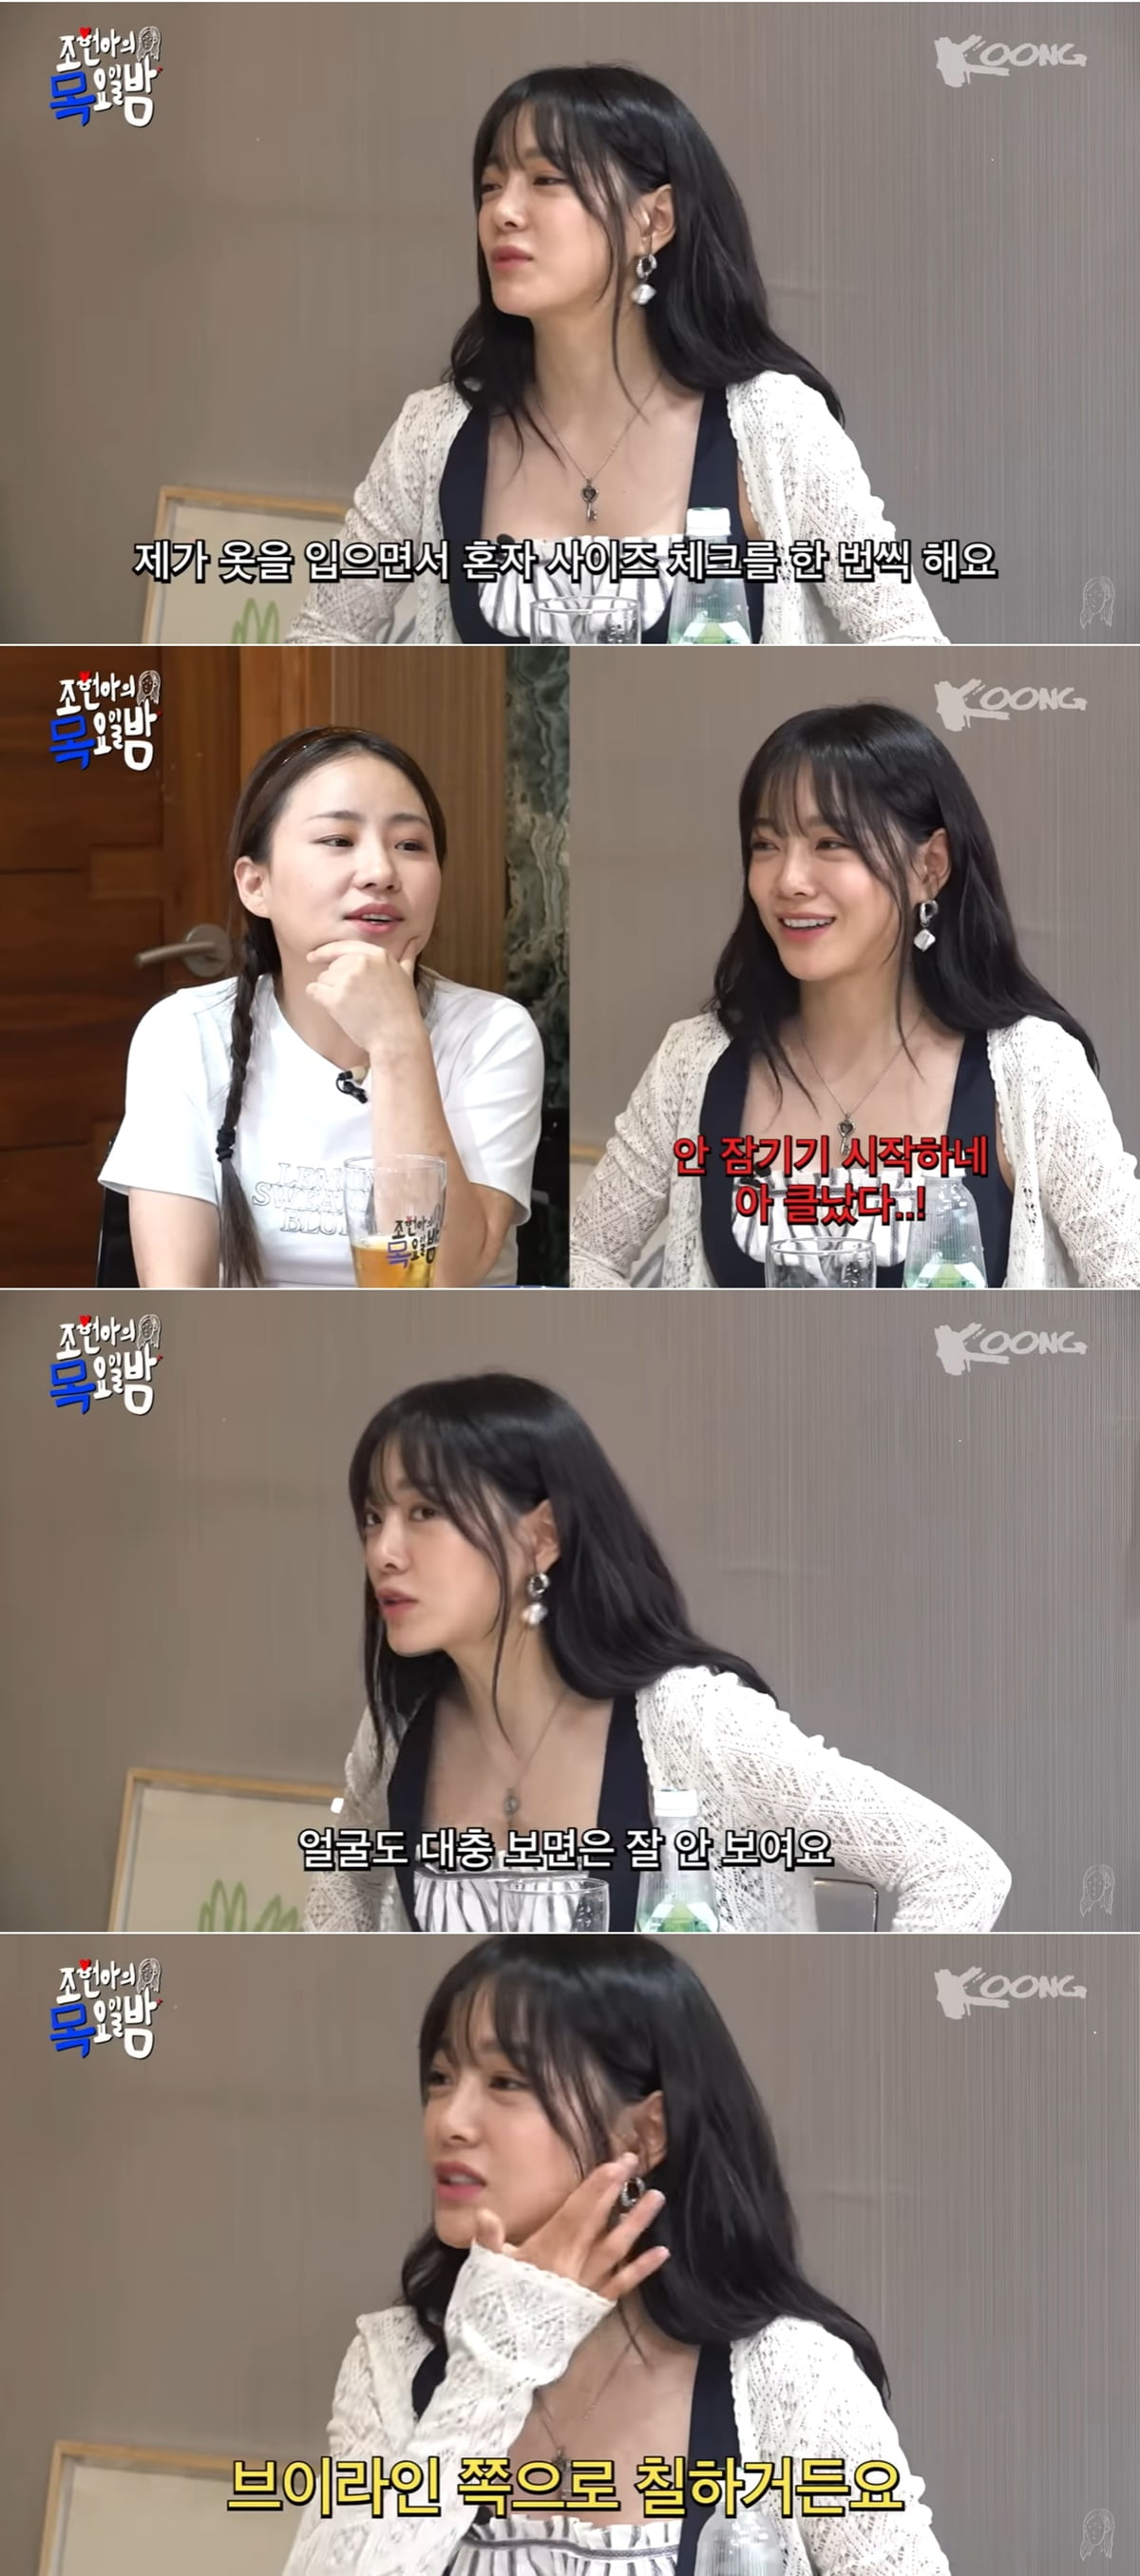 Kim Sejeong "I gained a lot of weight while filming the drama"